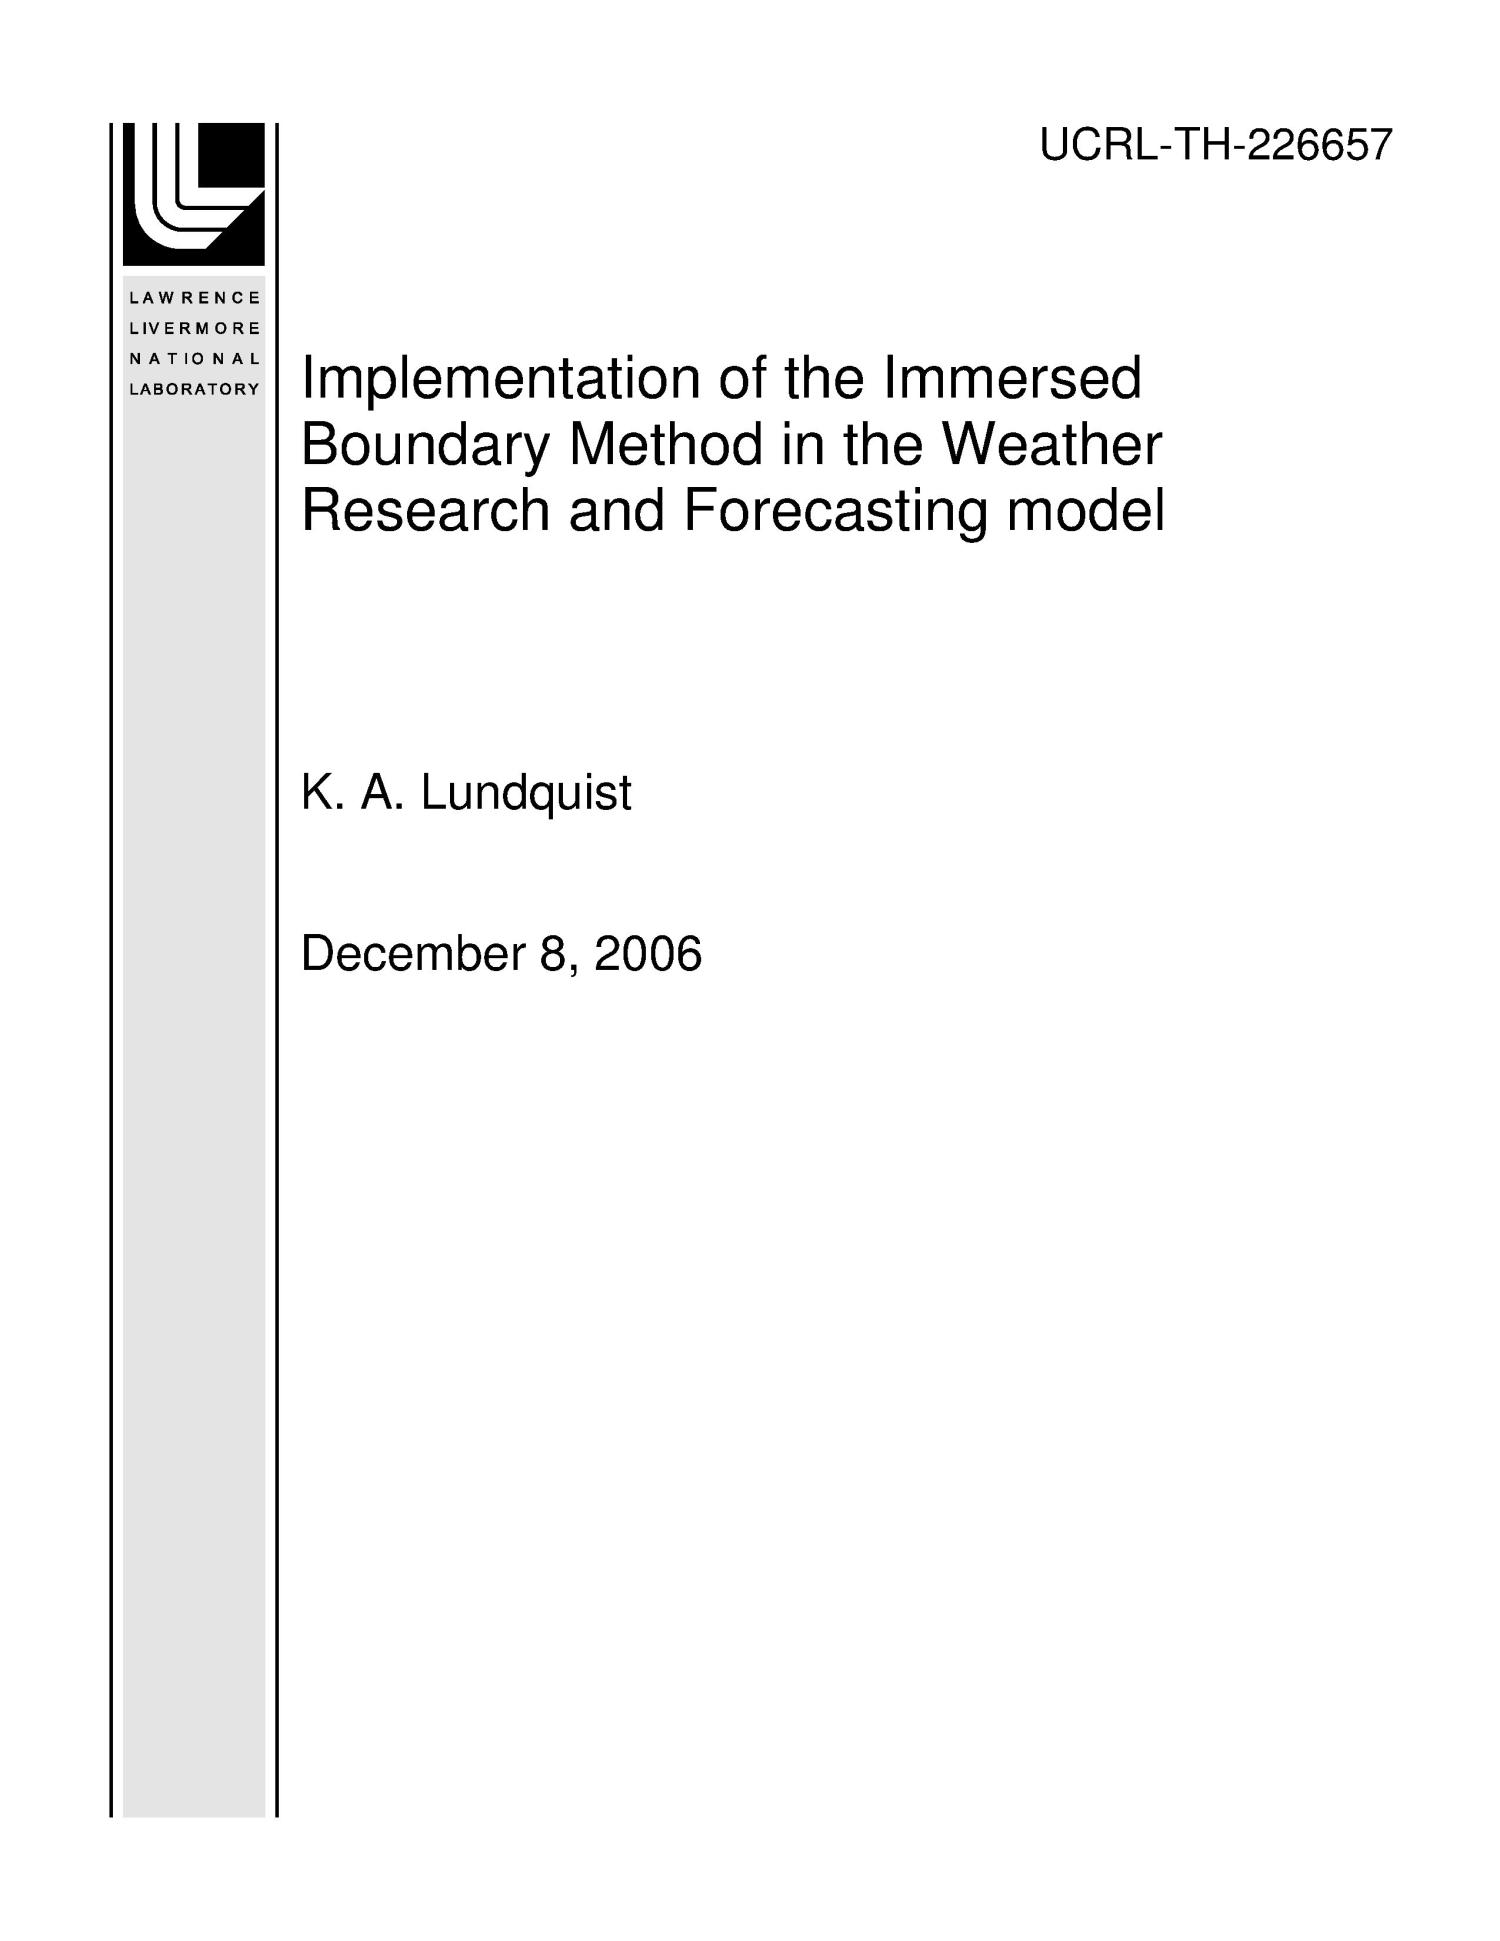 Implementation of the Immersed Boundary Method in the Weather Research and Forecasting model
                                                
                                                    [Sequence #]: 1 of 61
                                                